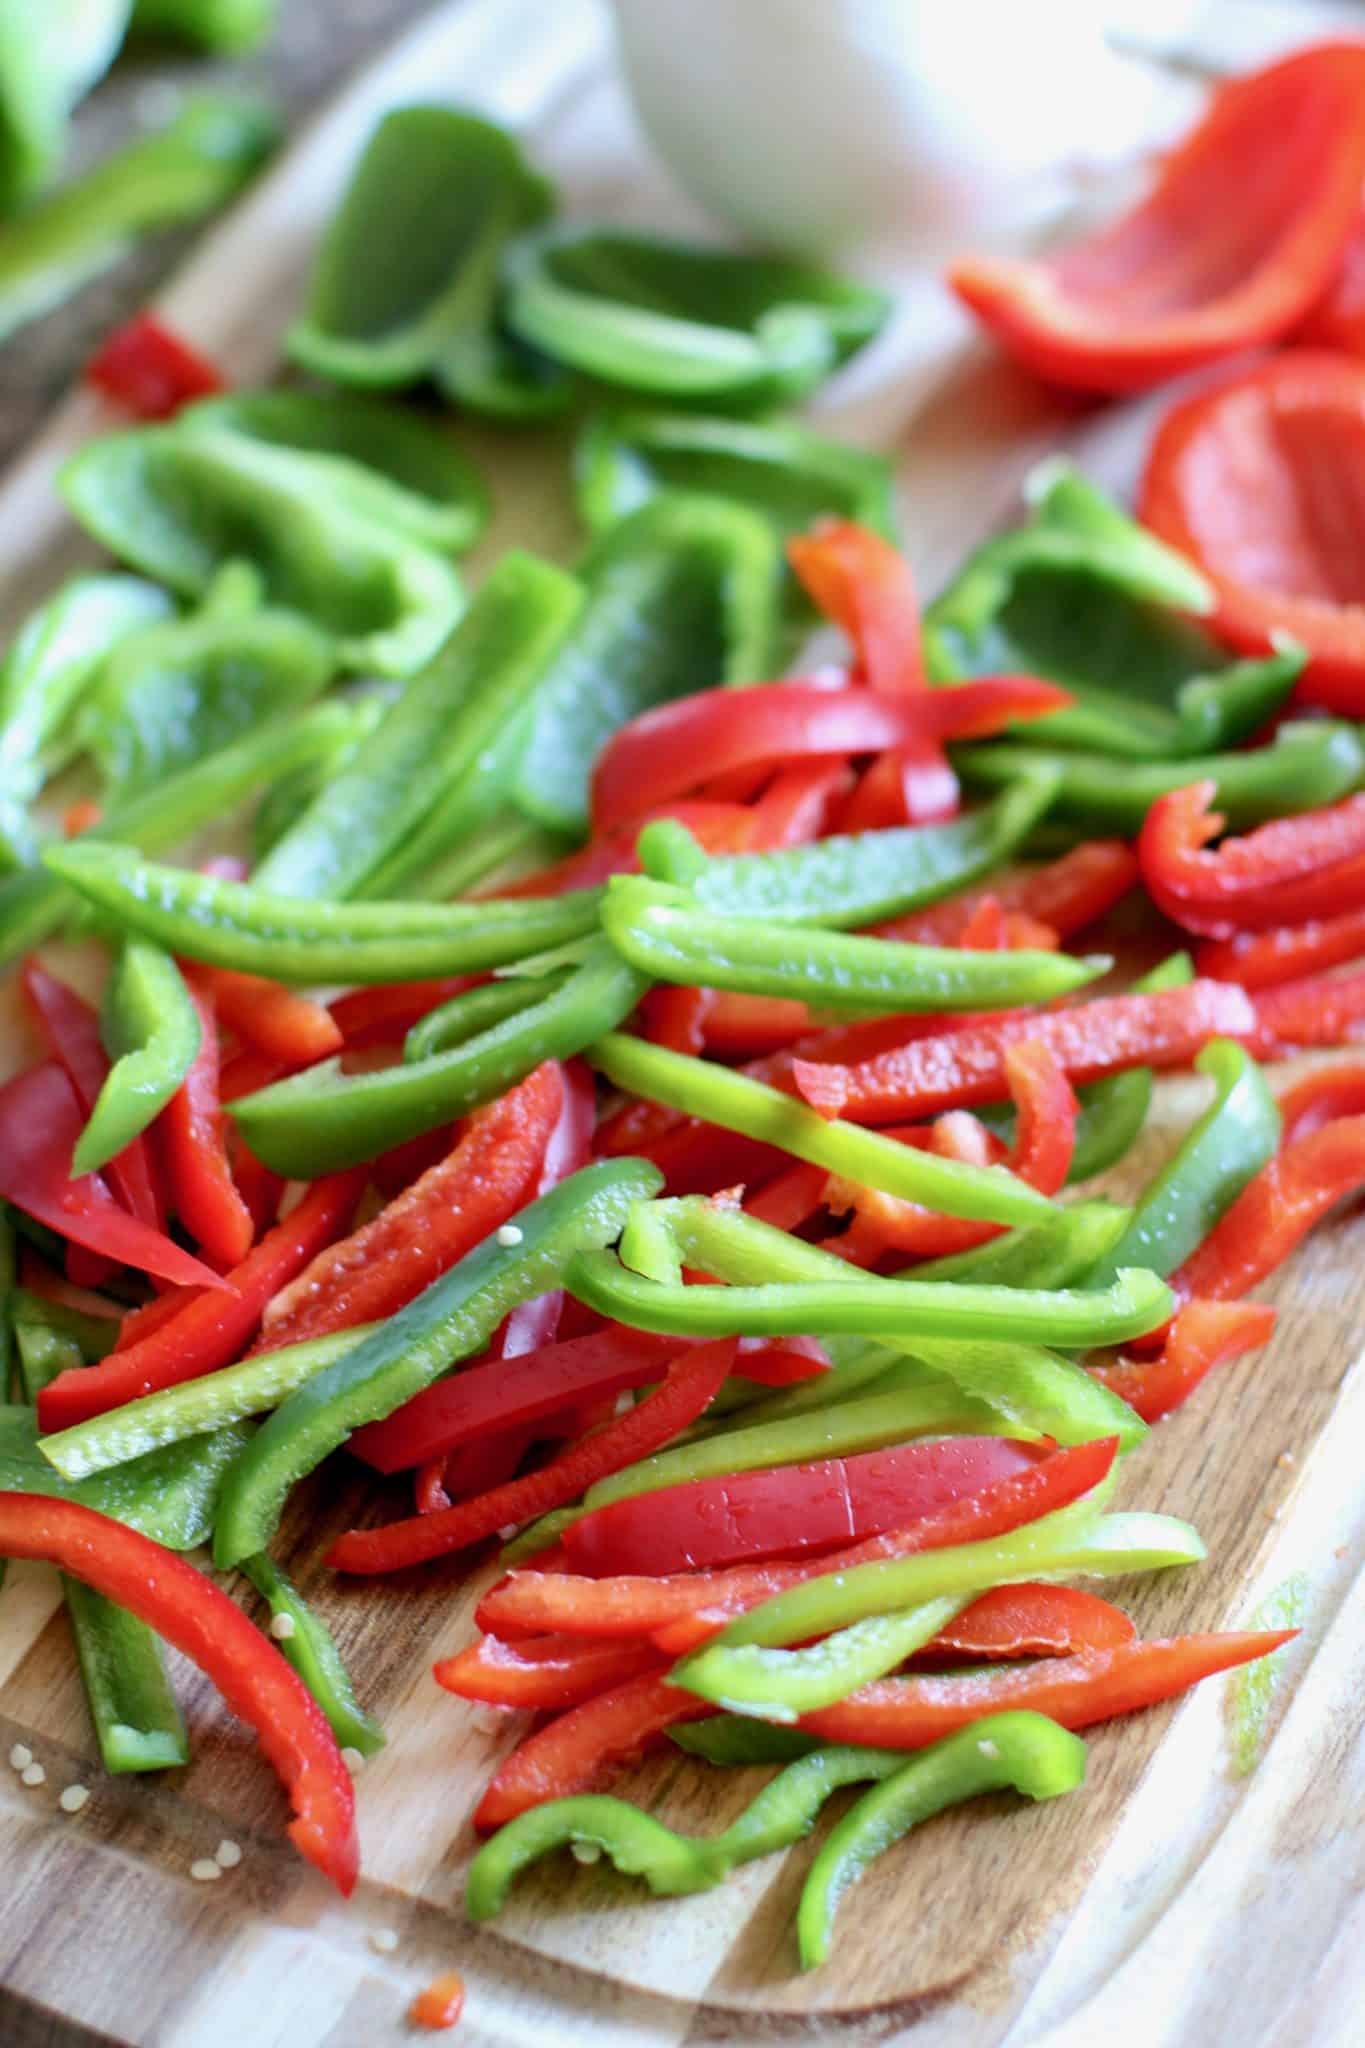 sliced green peppers, red peppers and onions